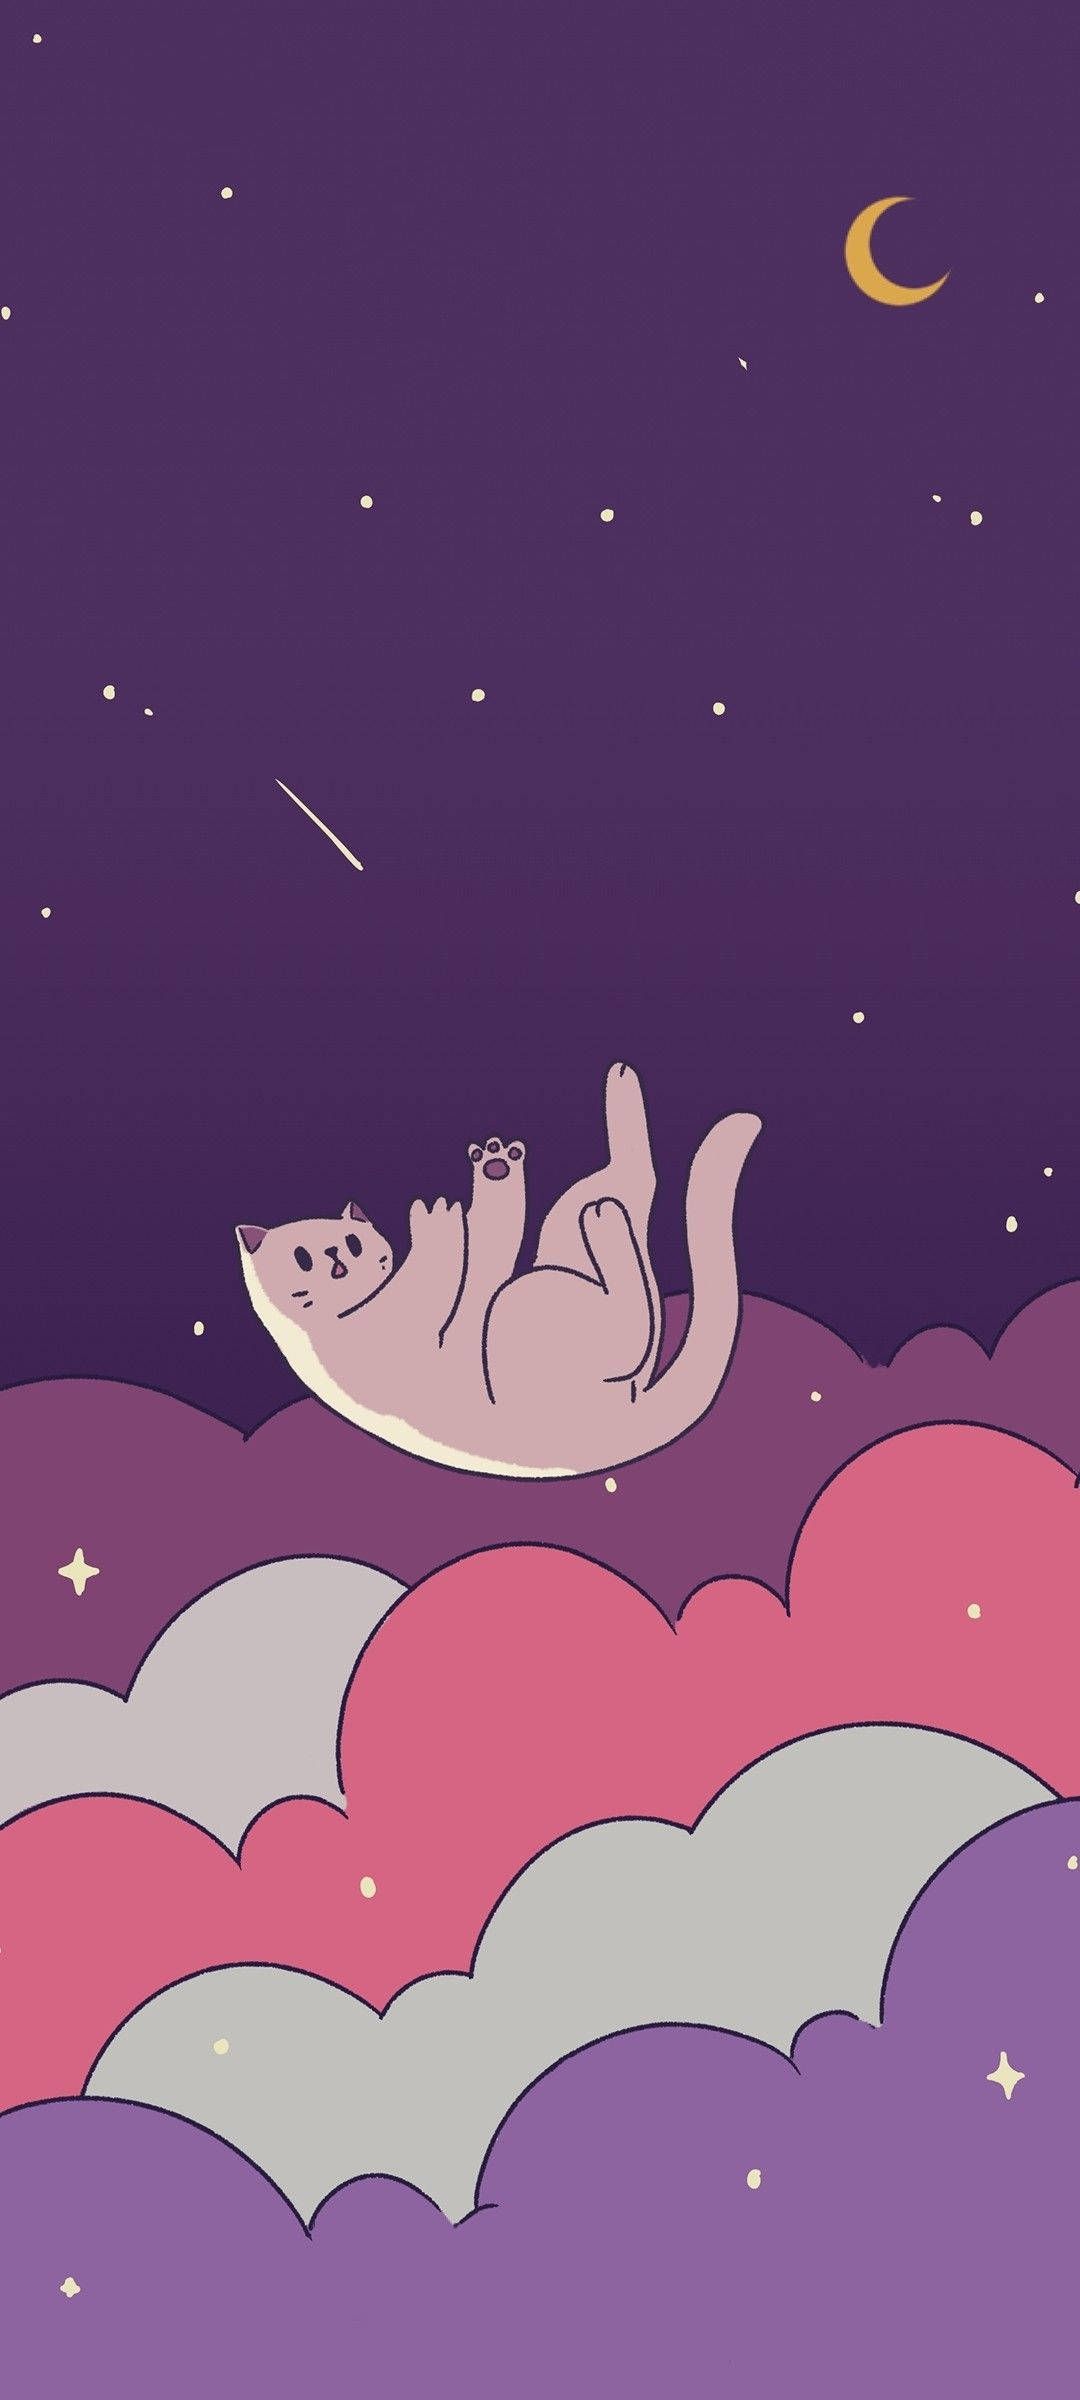 IPhone wallpaper of a cat lying on a cloud in the night sky - Art